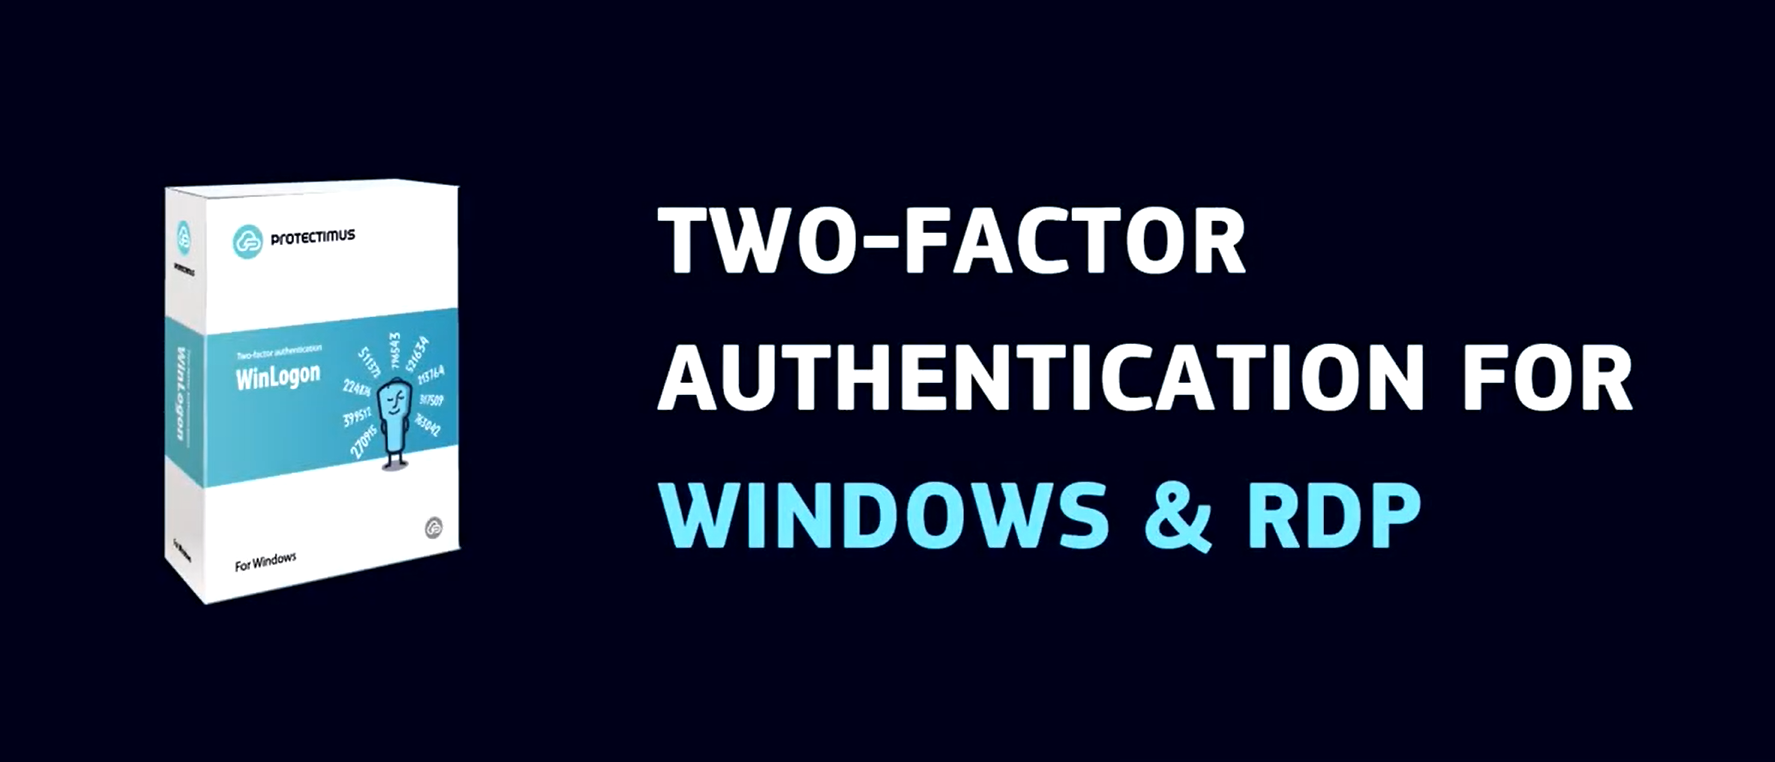 Enhancing Windows Security: Multi-Factor Authentication Solutions for Windows 7/8/10 and Windows ServerEnhancing Windows Security: